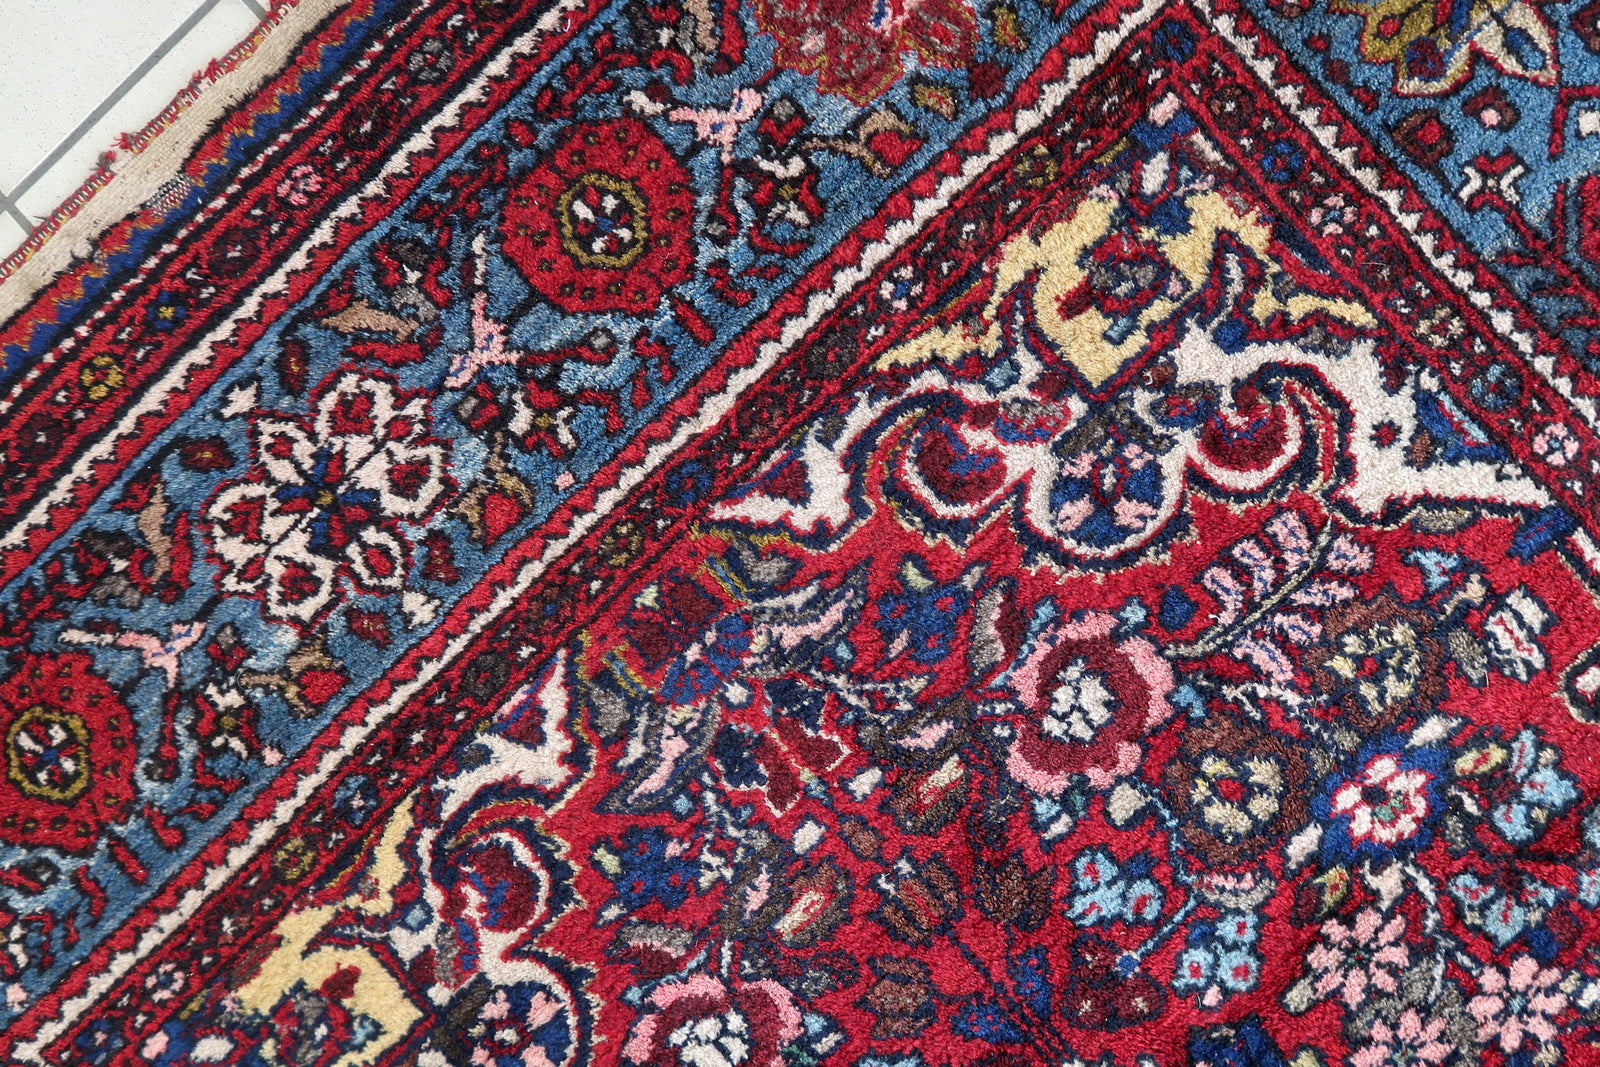 Close-up of red hues on Handmade Vintage Persian Malayer Rug - Detailed view highlighting the vibrant red colors.